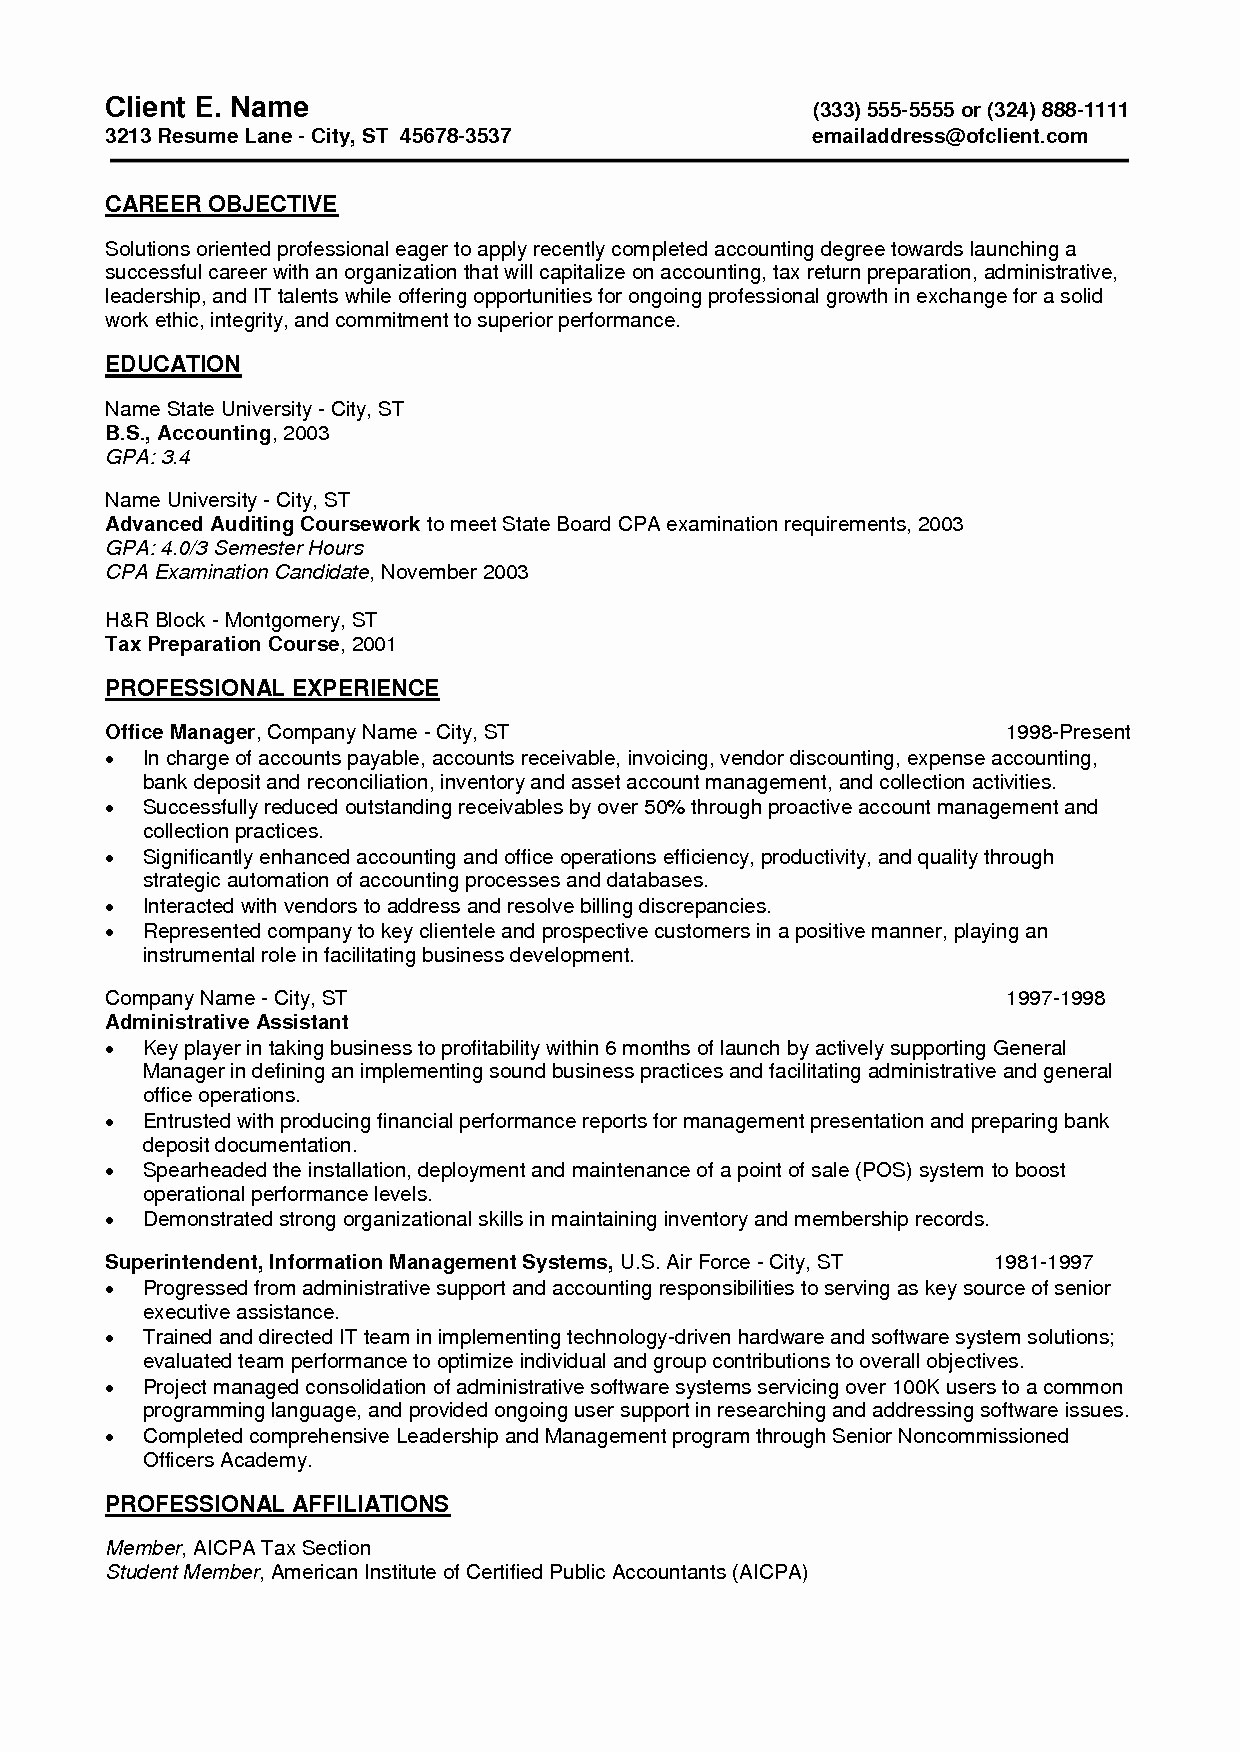 Resume for Entry Level Position Beautiful Entry Level Resume Example Entry Level Job Resume Examples